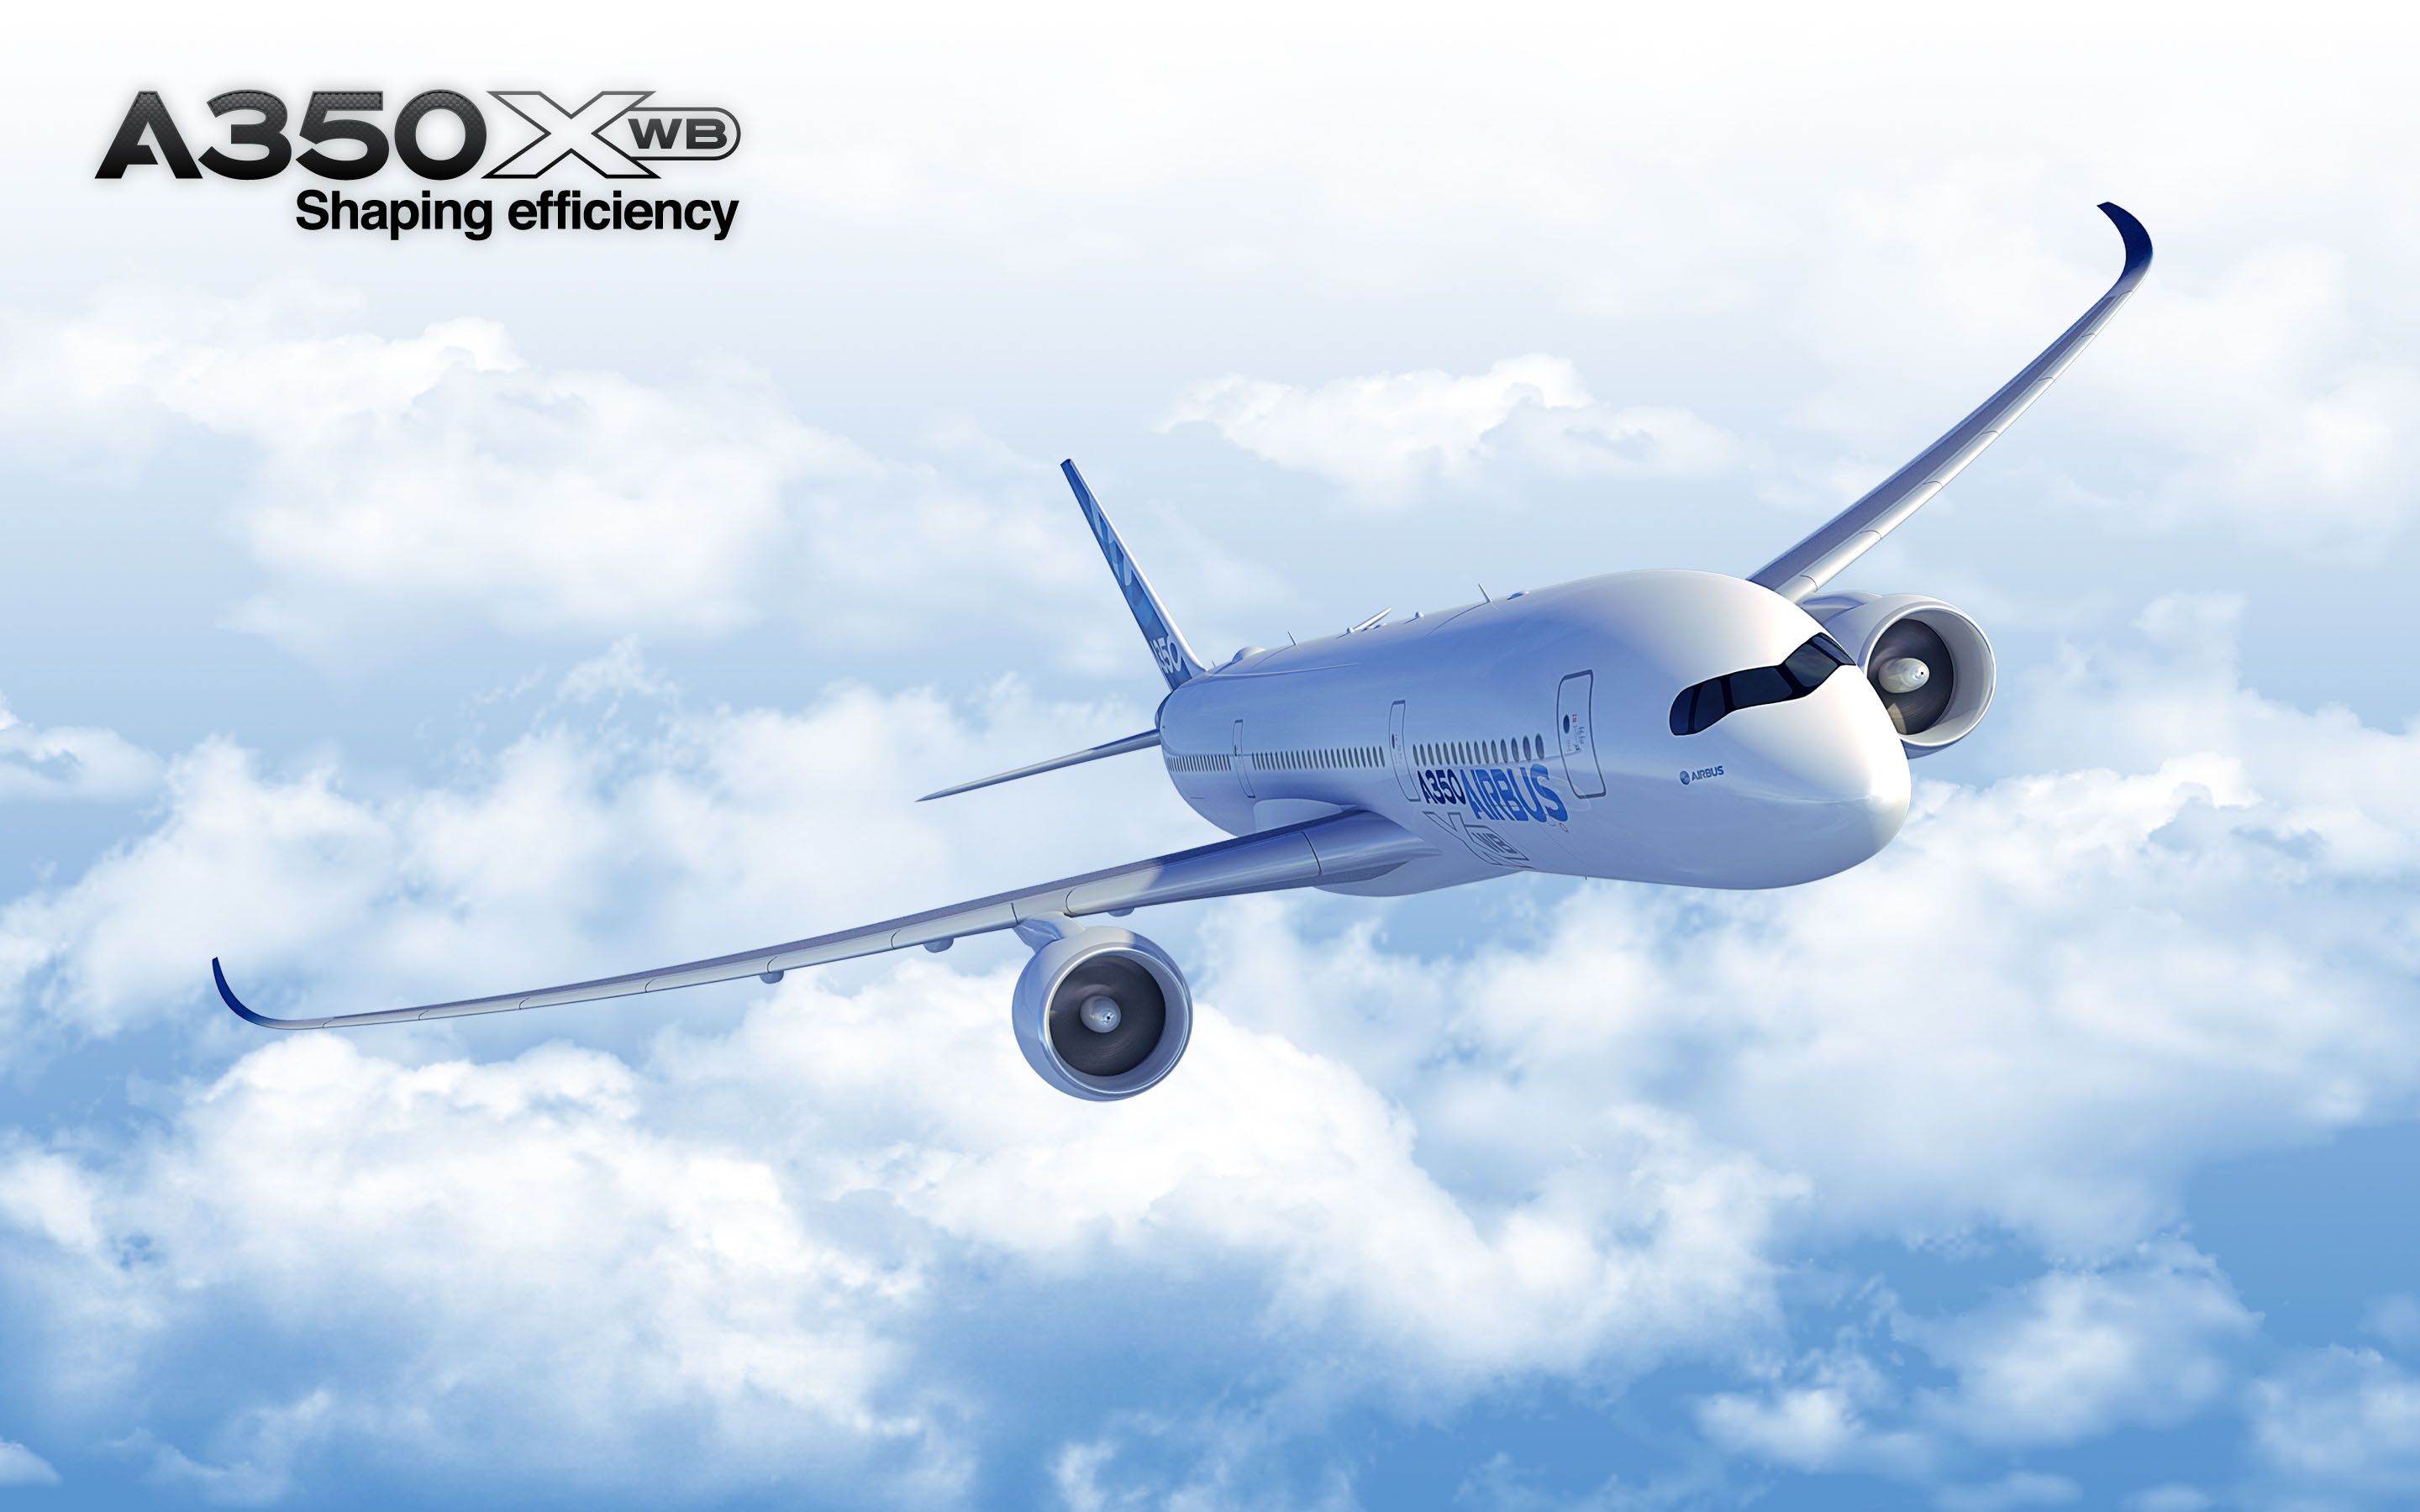 Airbus A350 Wallpaper Free Airbus A350 Background